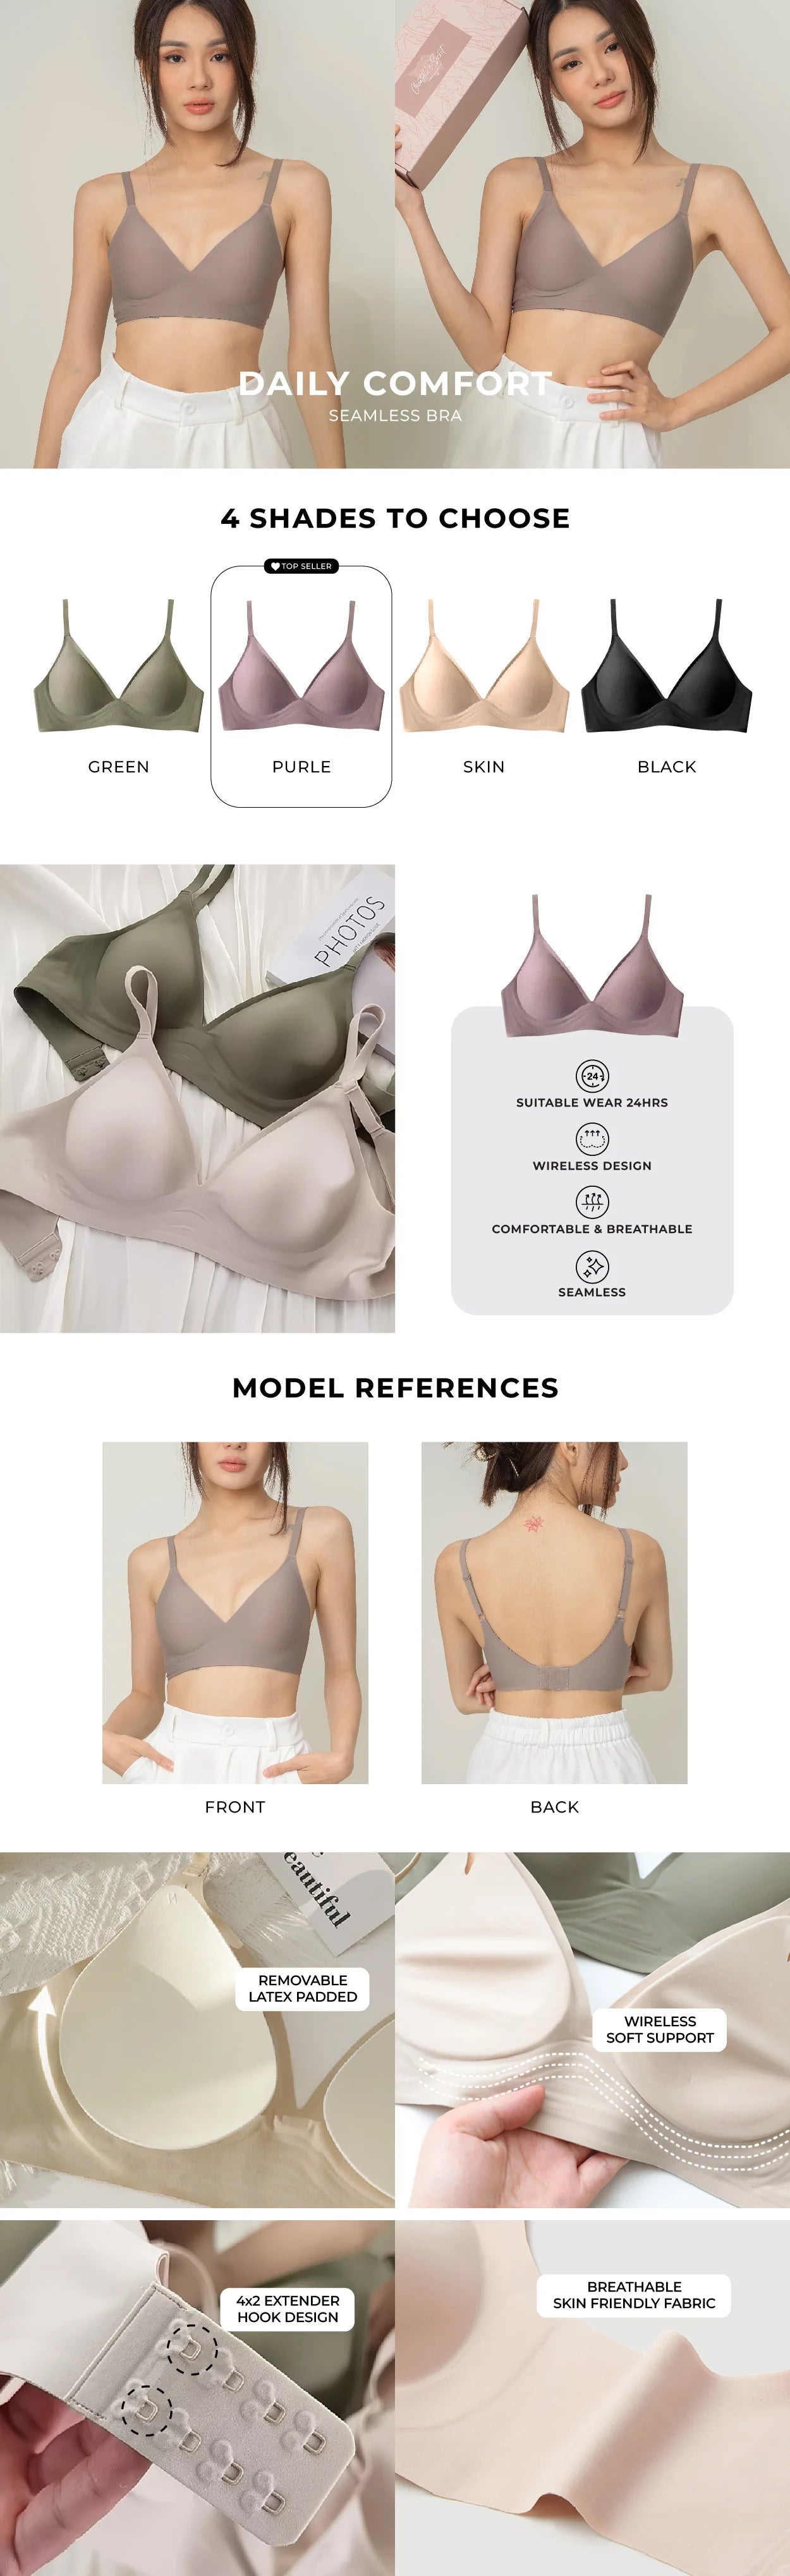 A composite image showing Chantelle's Secret Daily Comfort Seamless Bra in four colors with detailed features such as removable latex padding, 4x2 extender hook design, wireless soft support, and breathable skin-friendly fabric, presented alongside model references for front and back views